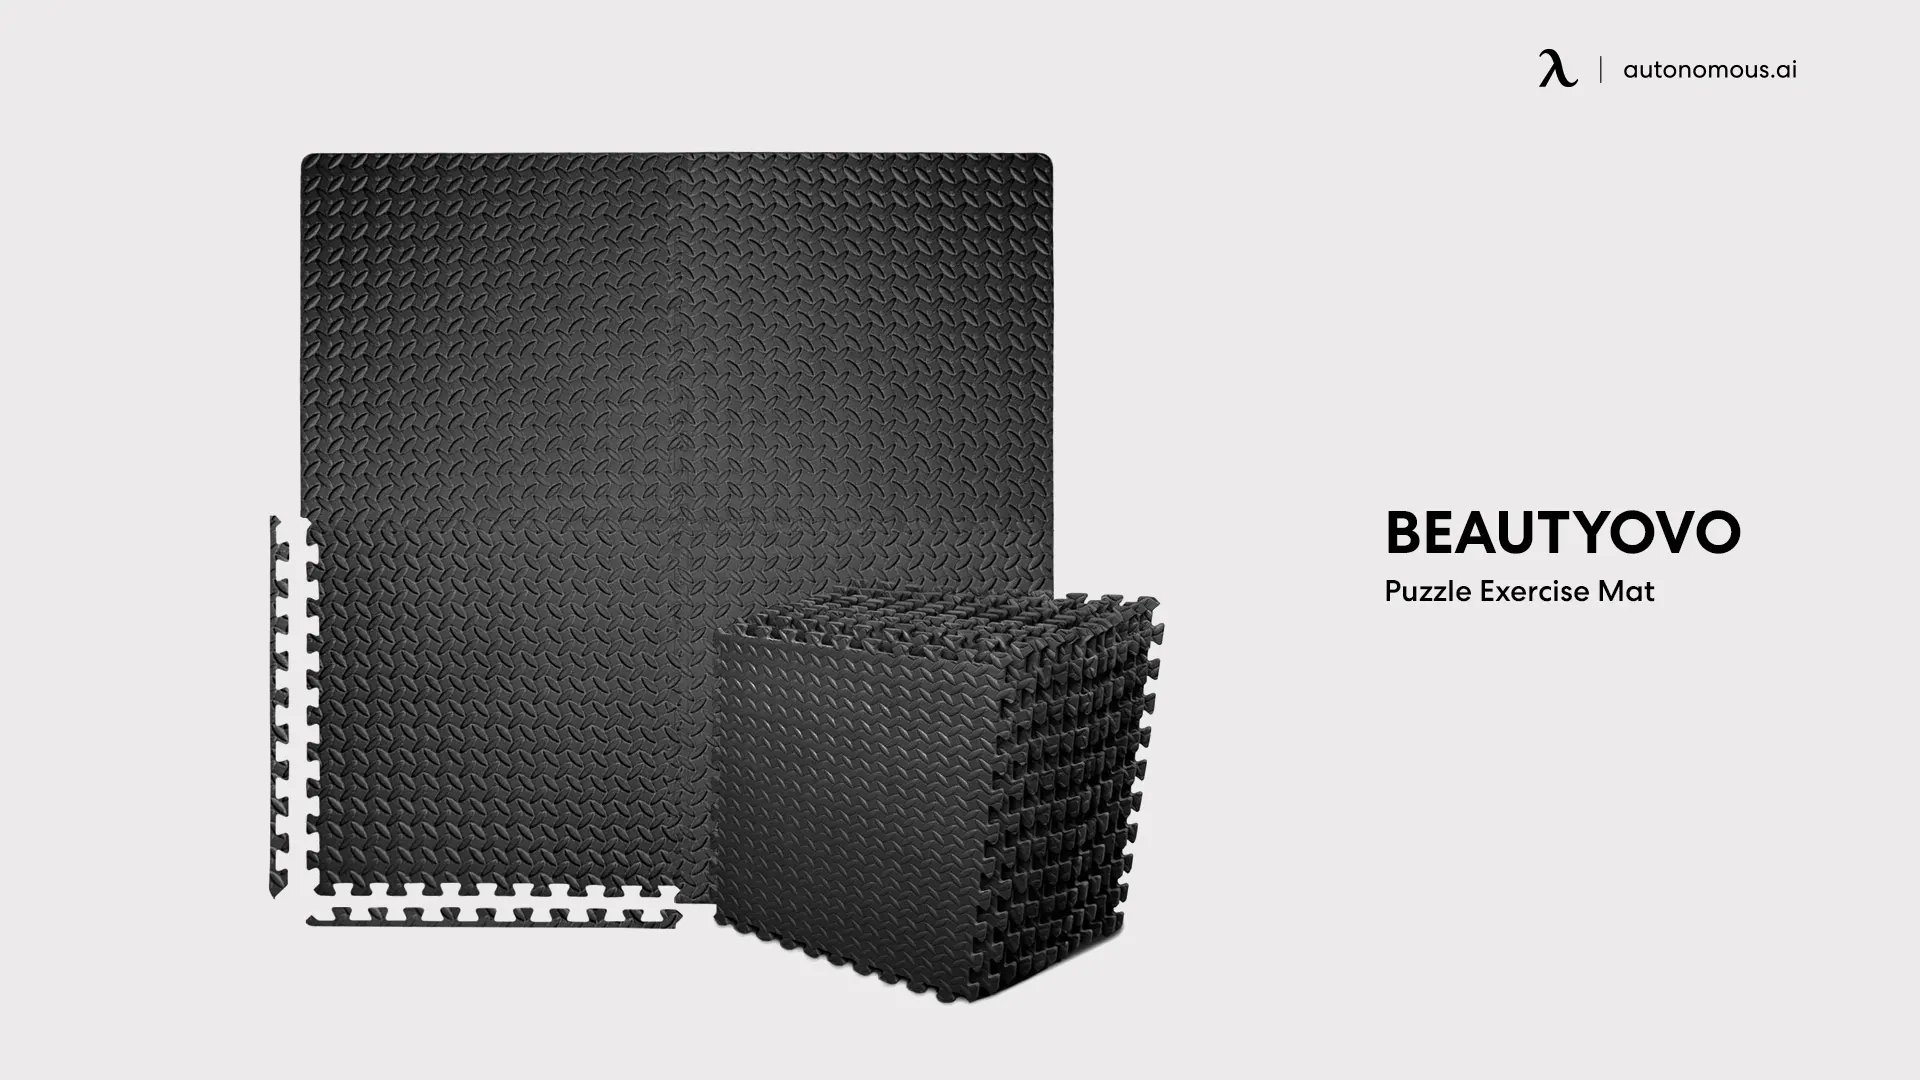 Beautyovo Puzzle Exercise Mat